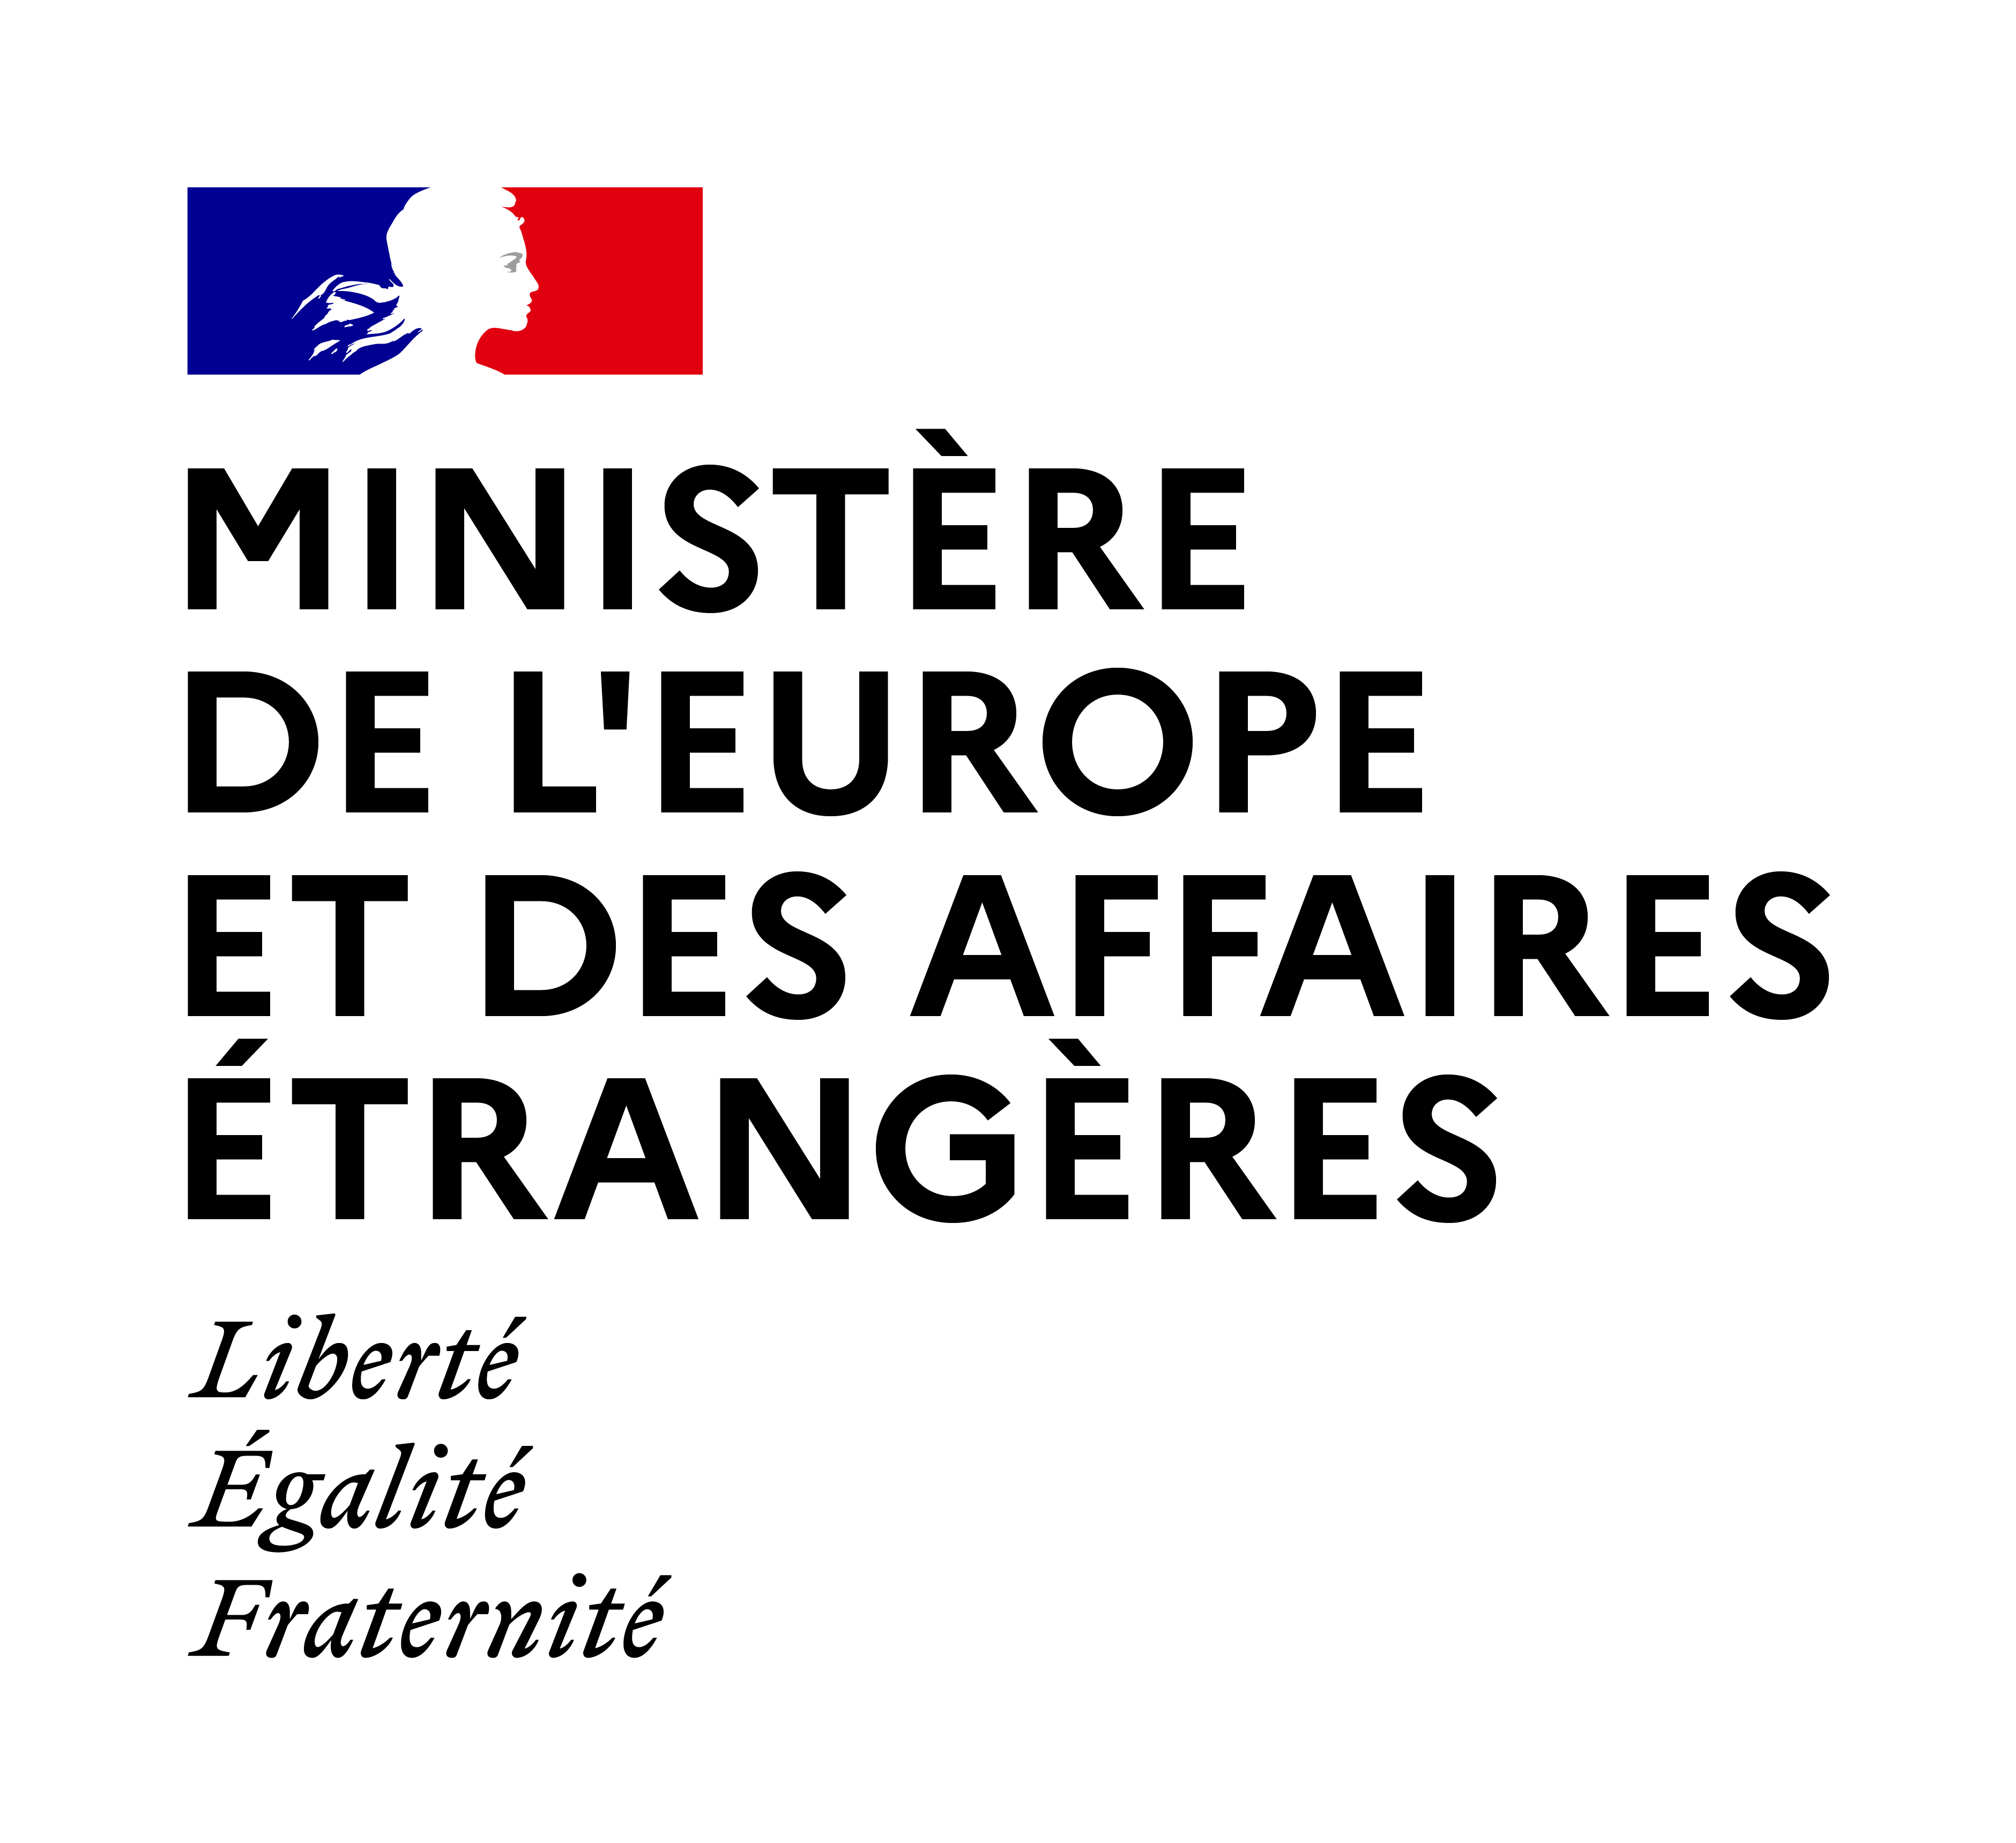 Cofinanced by the French Ministry of Europe and Foreign Affairs